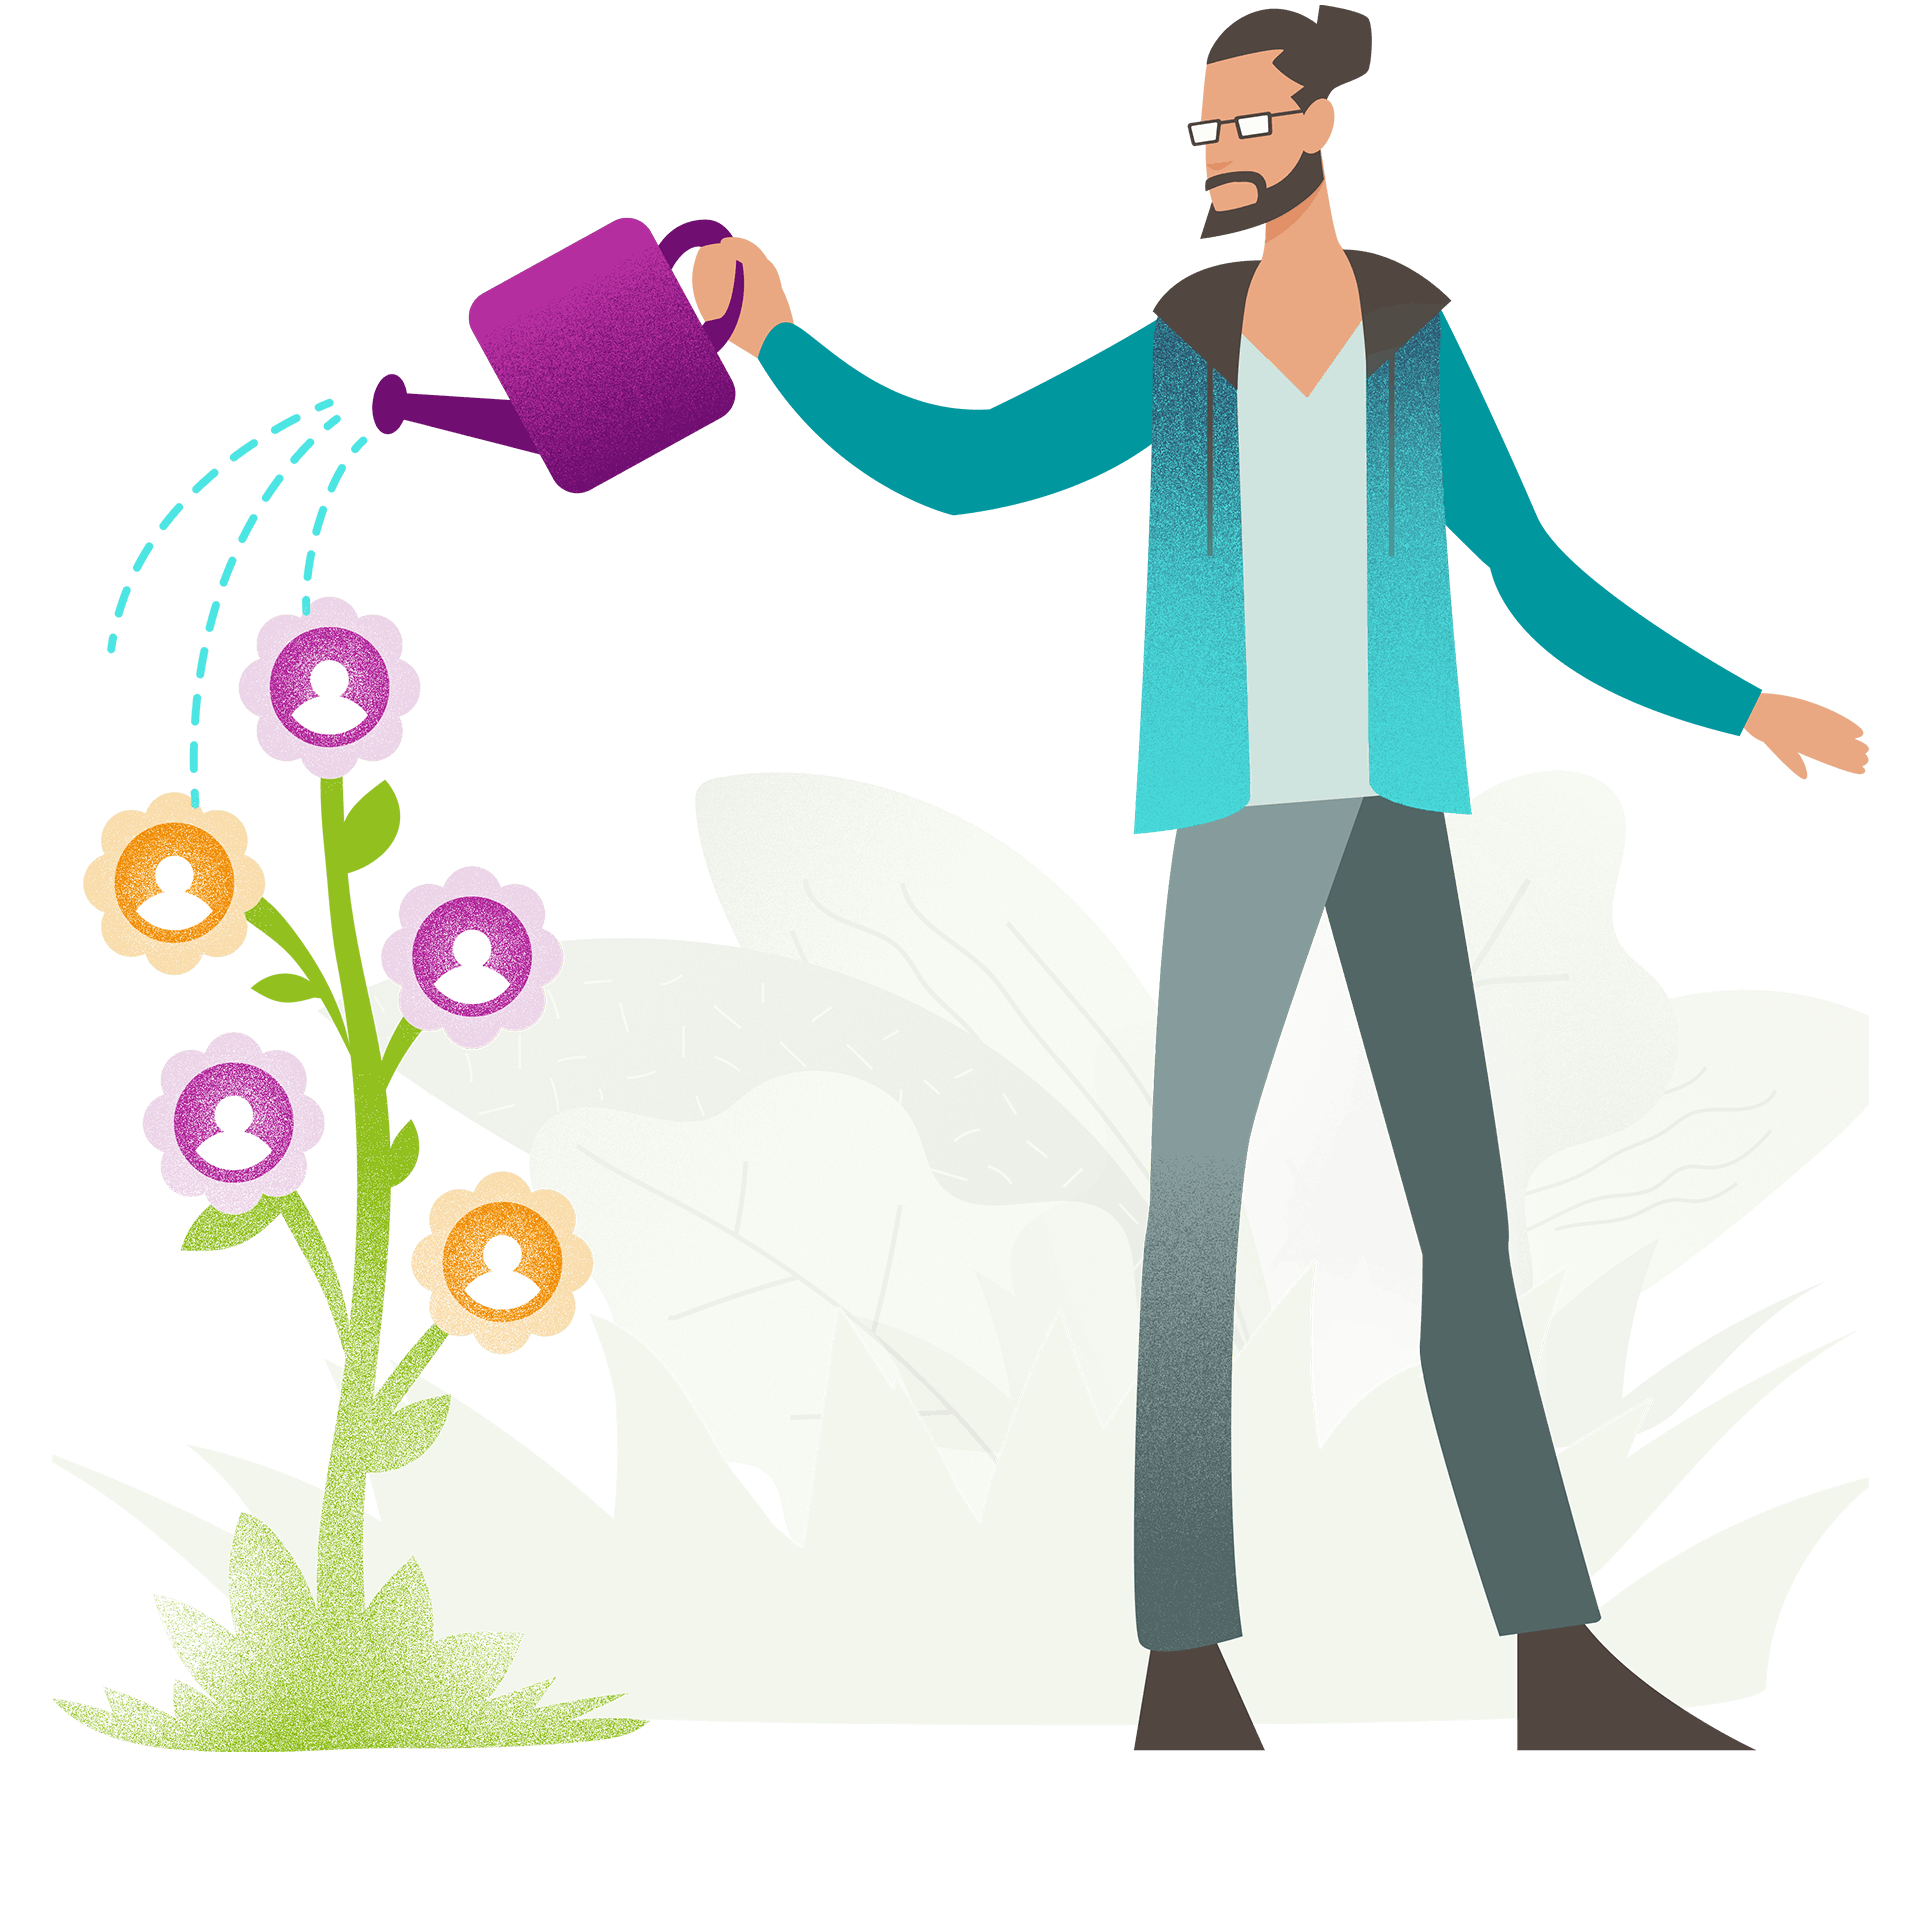 An illustration of a person giving water to a plant